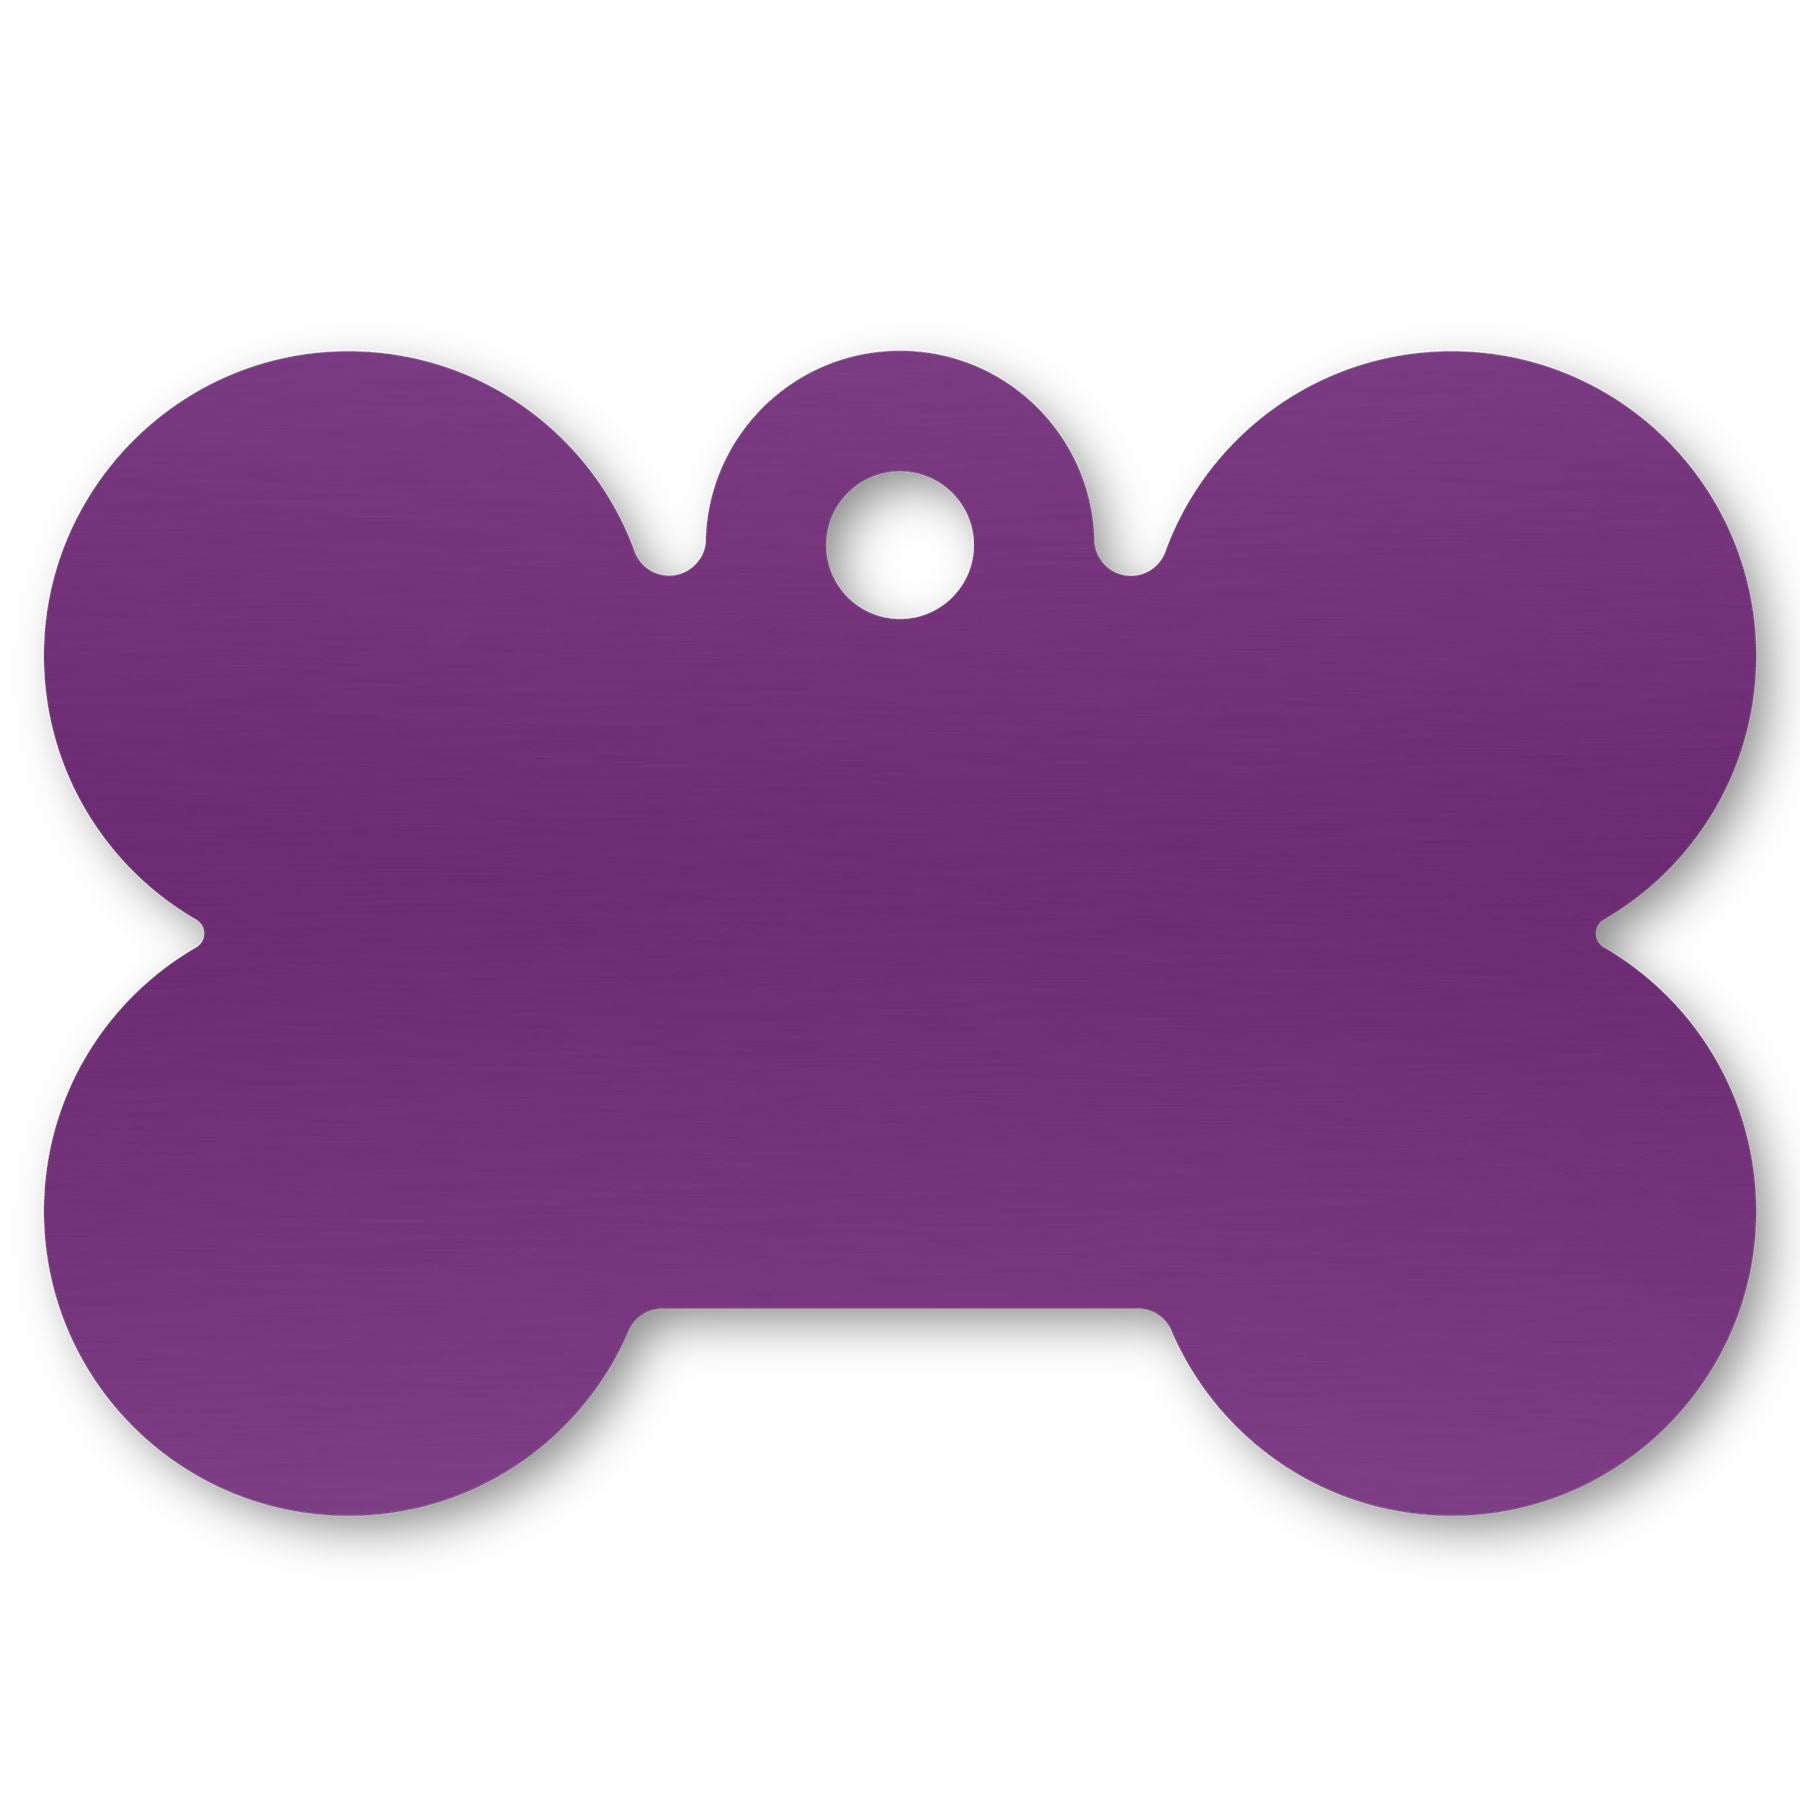 Anodized Aluminum Dog Bone Shaped Tags, 1-1/32" x 1-5/16" with 1/8" Hole, Laser Engraved Metal Tags Craftworks NW Purple 